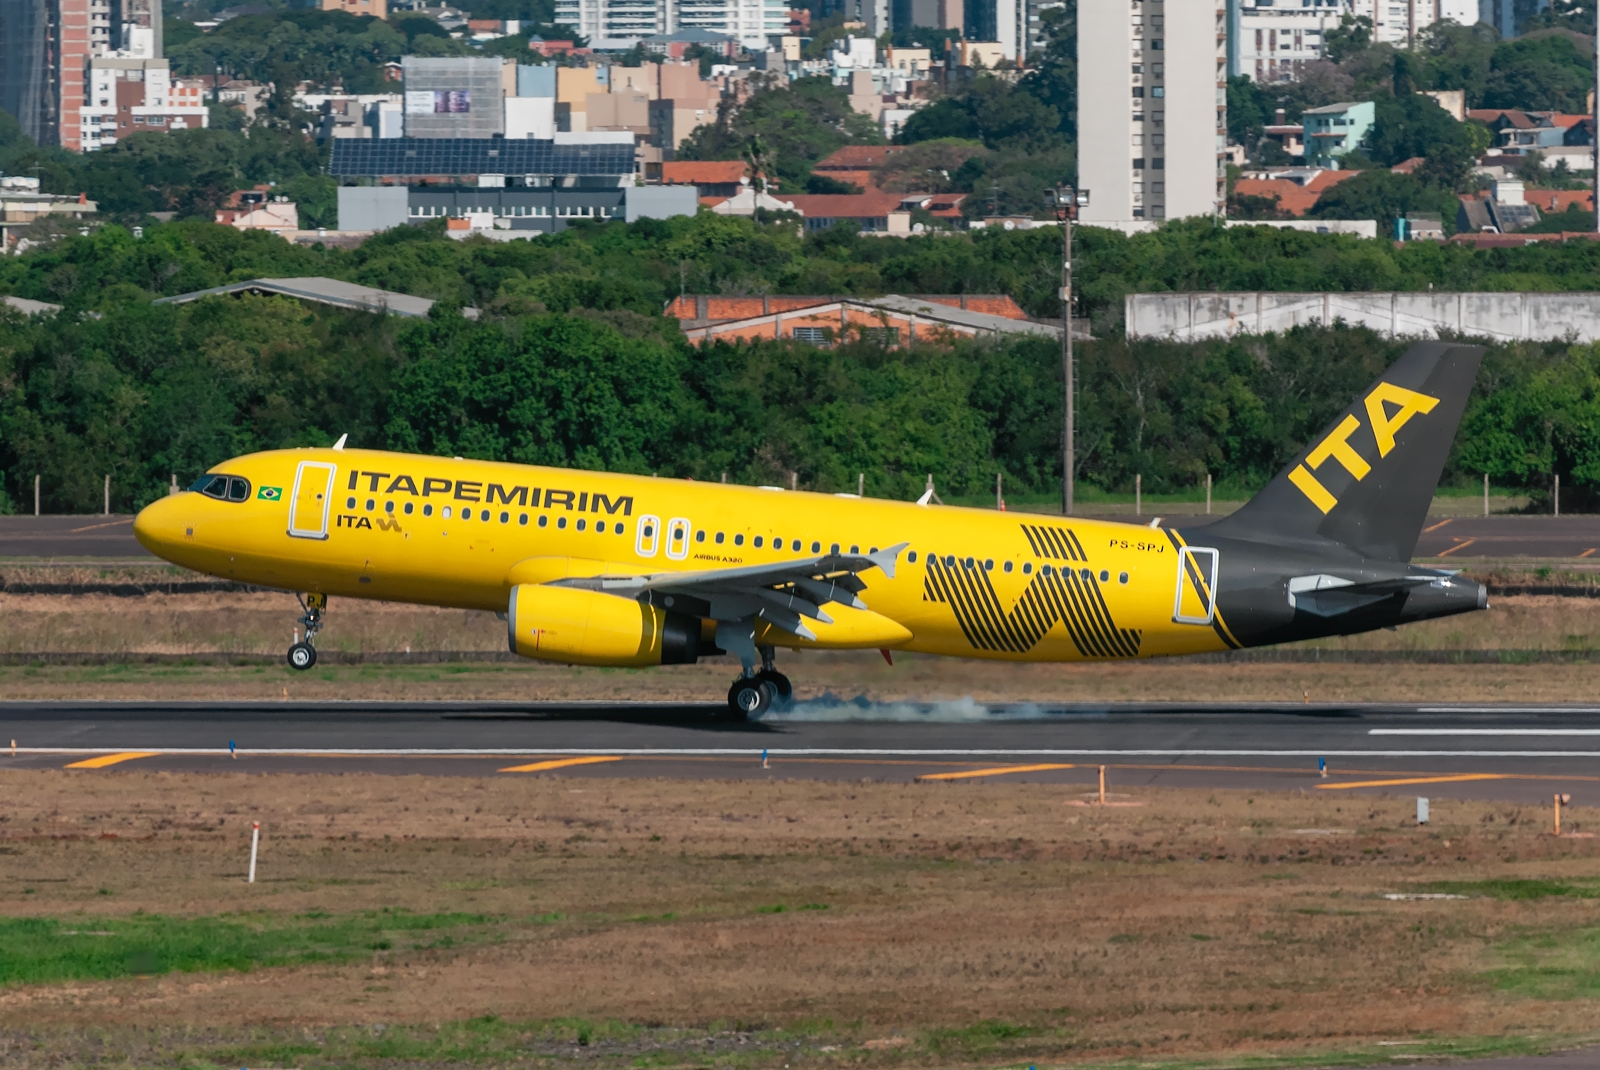 PS-SPJ - Airbus A320-200